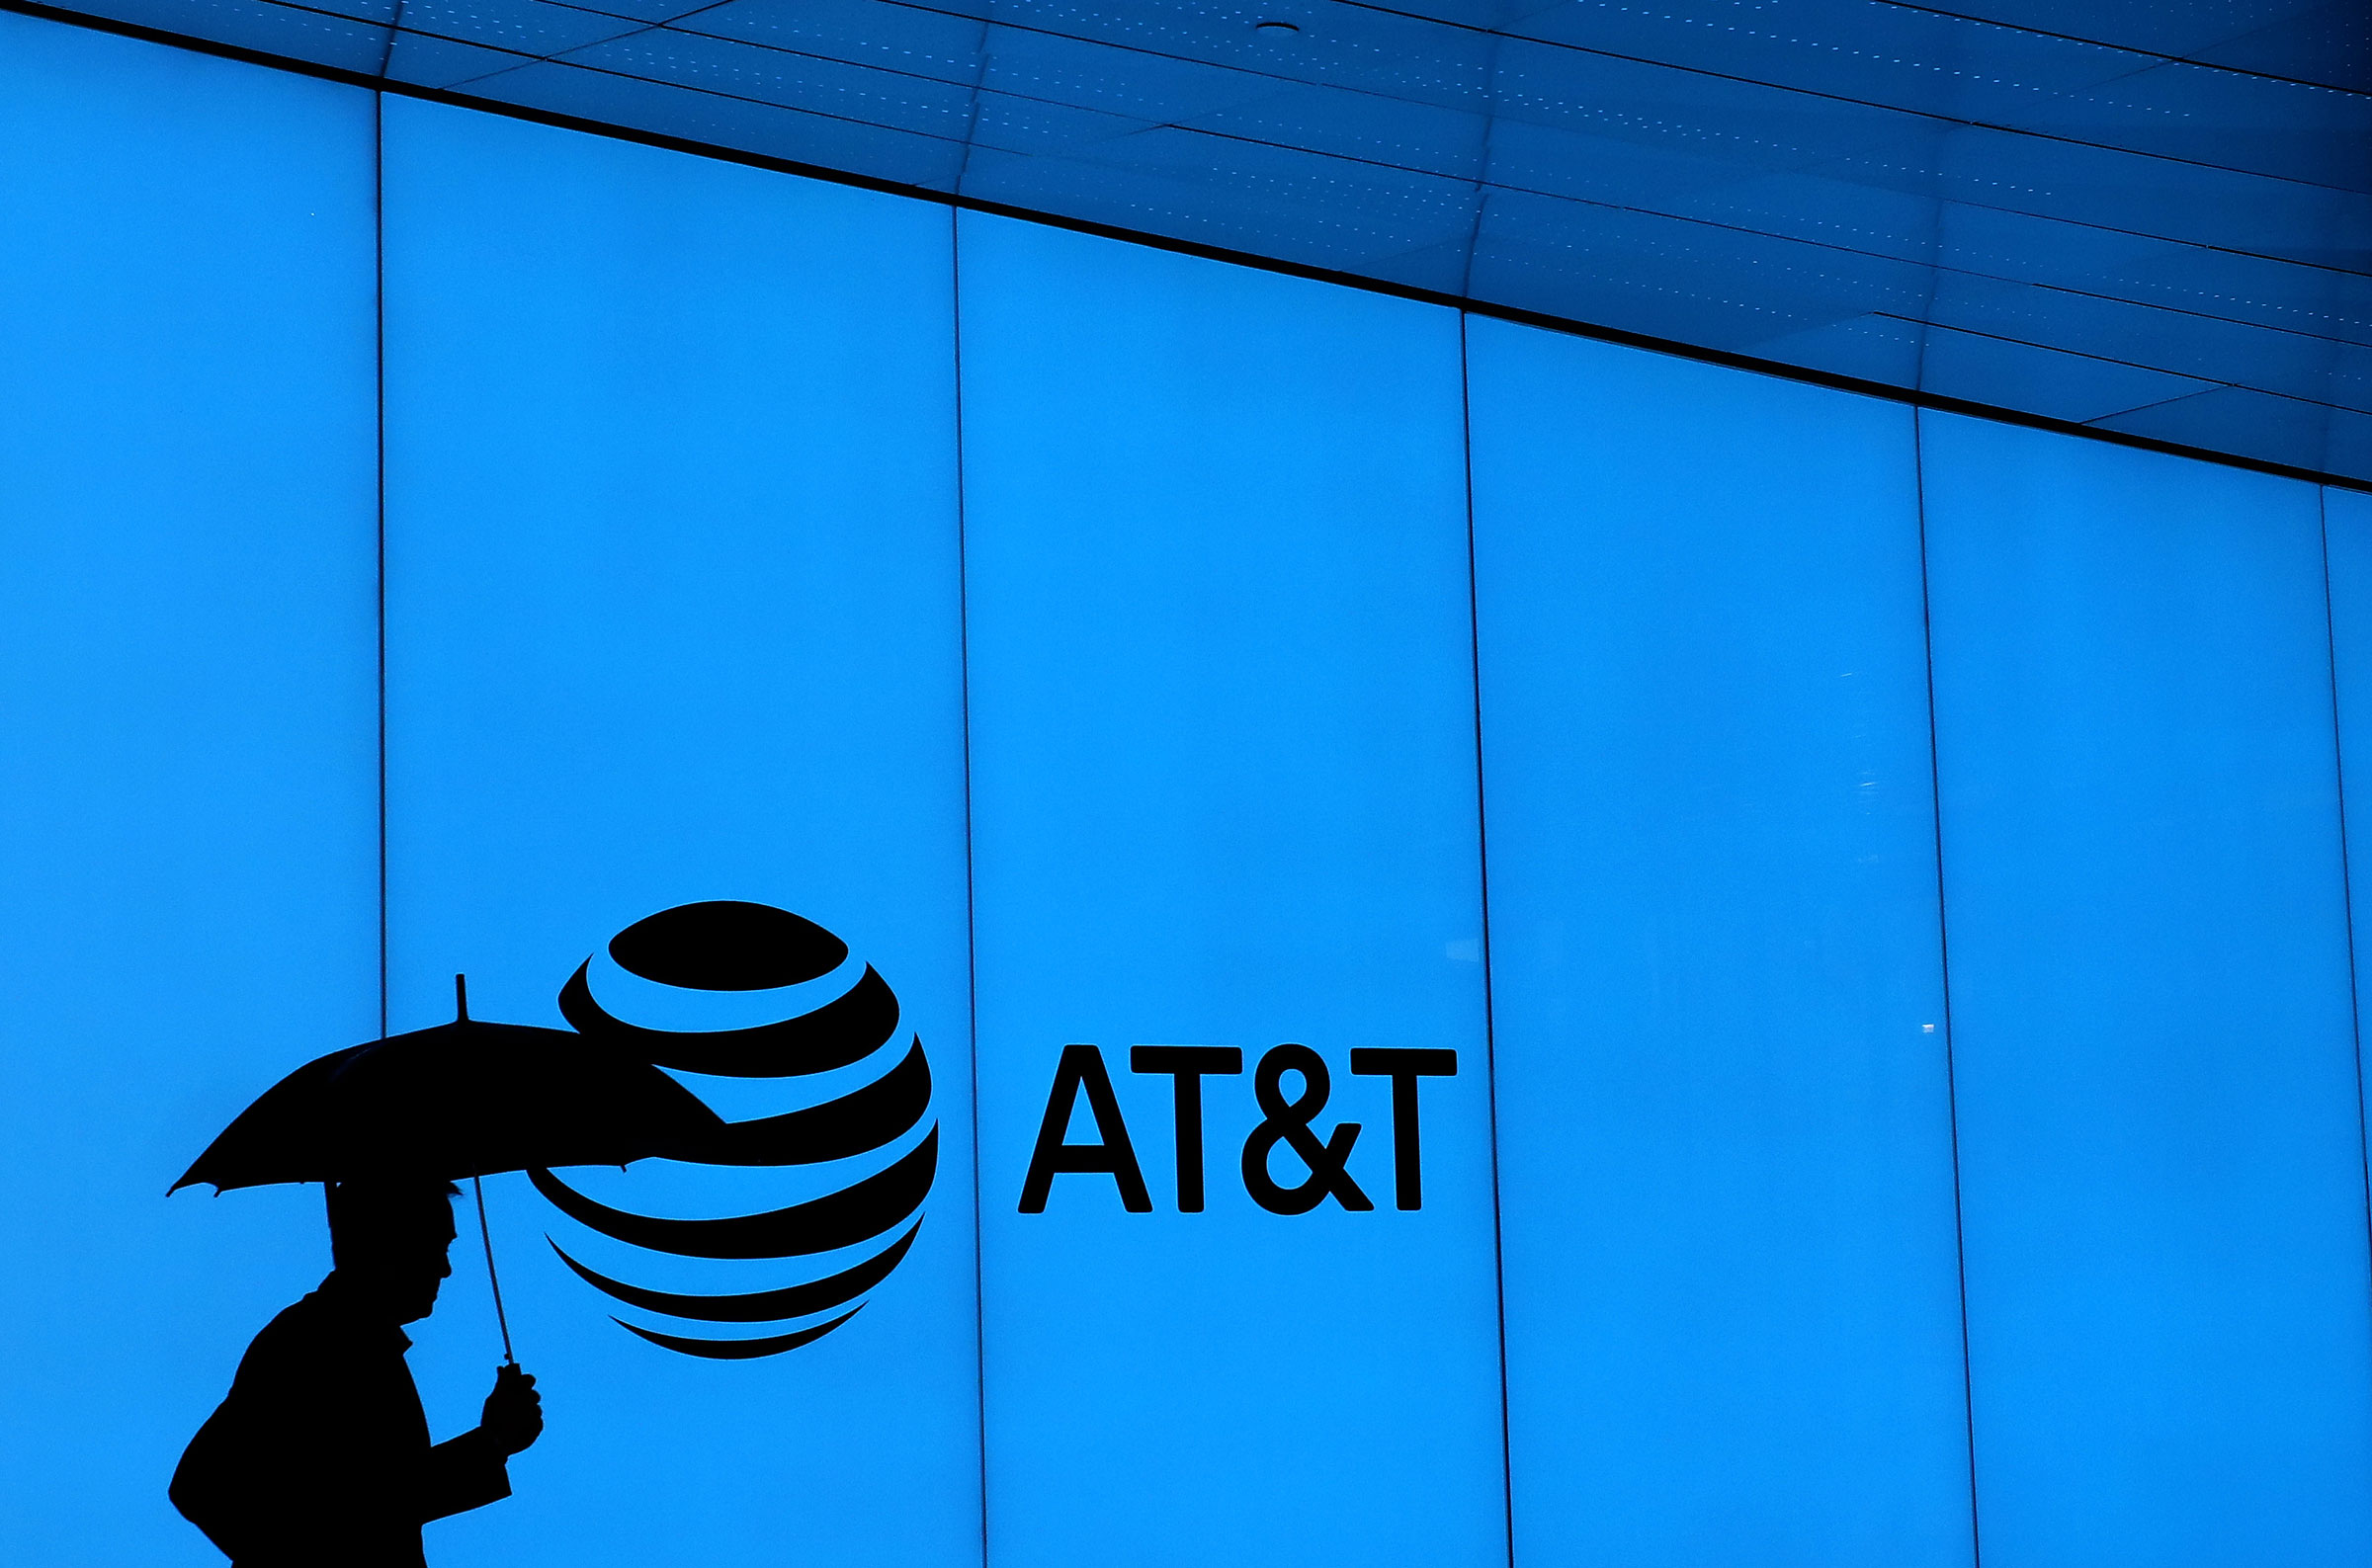 silhouette of a man holding umbrella against blue wall with AT&T logo